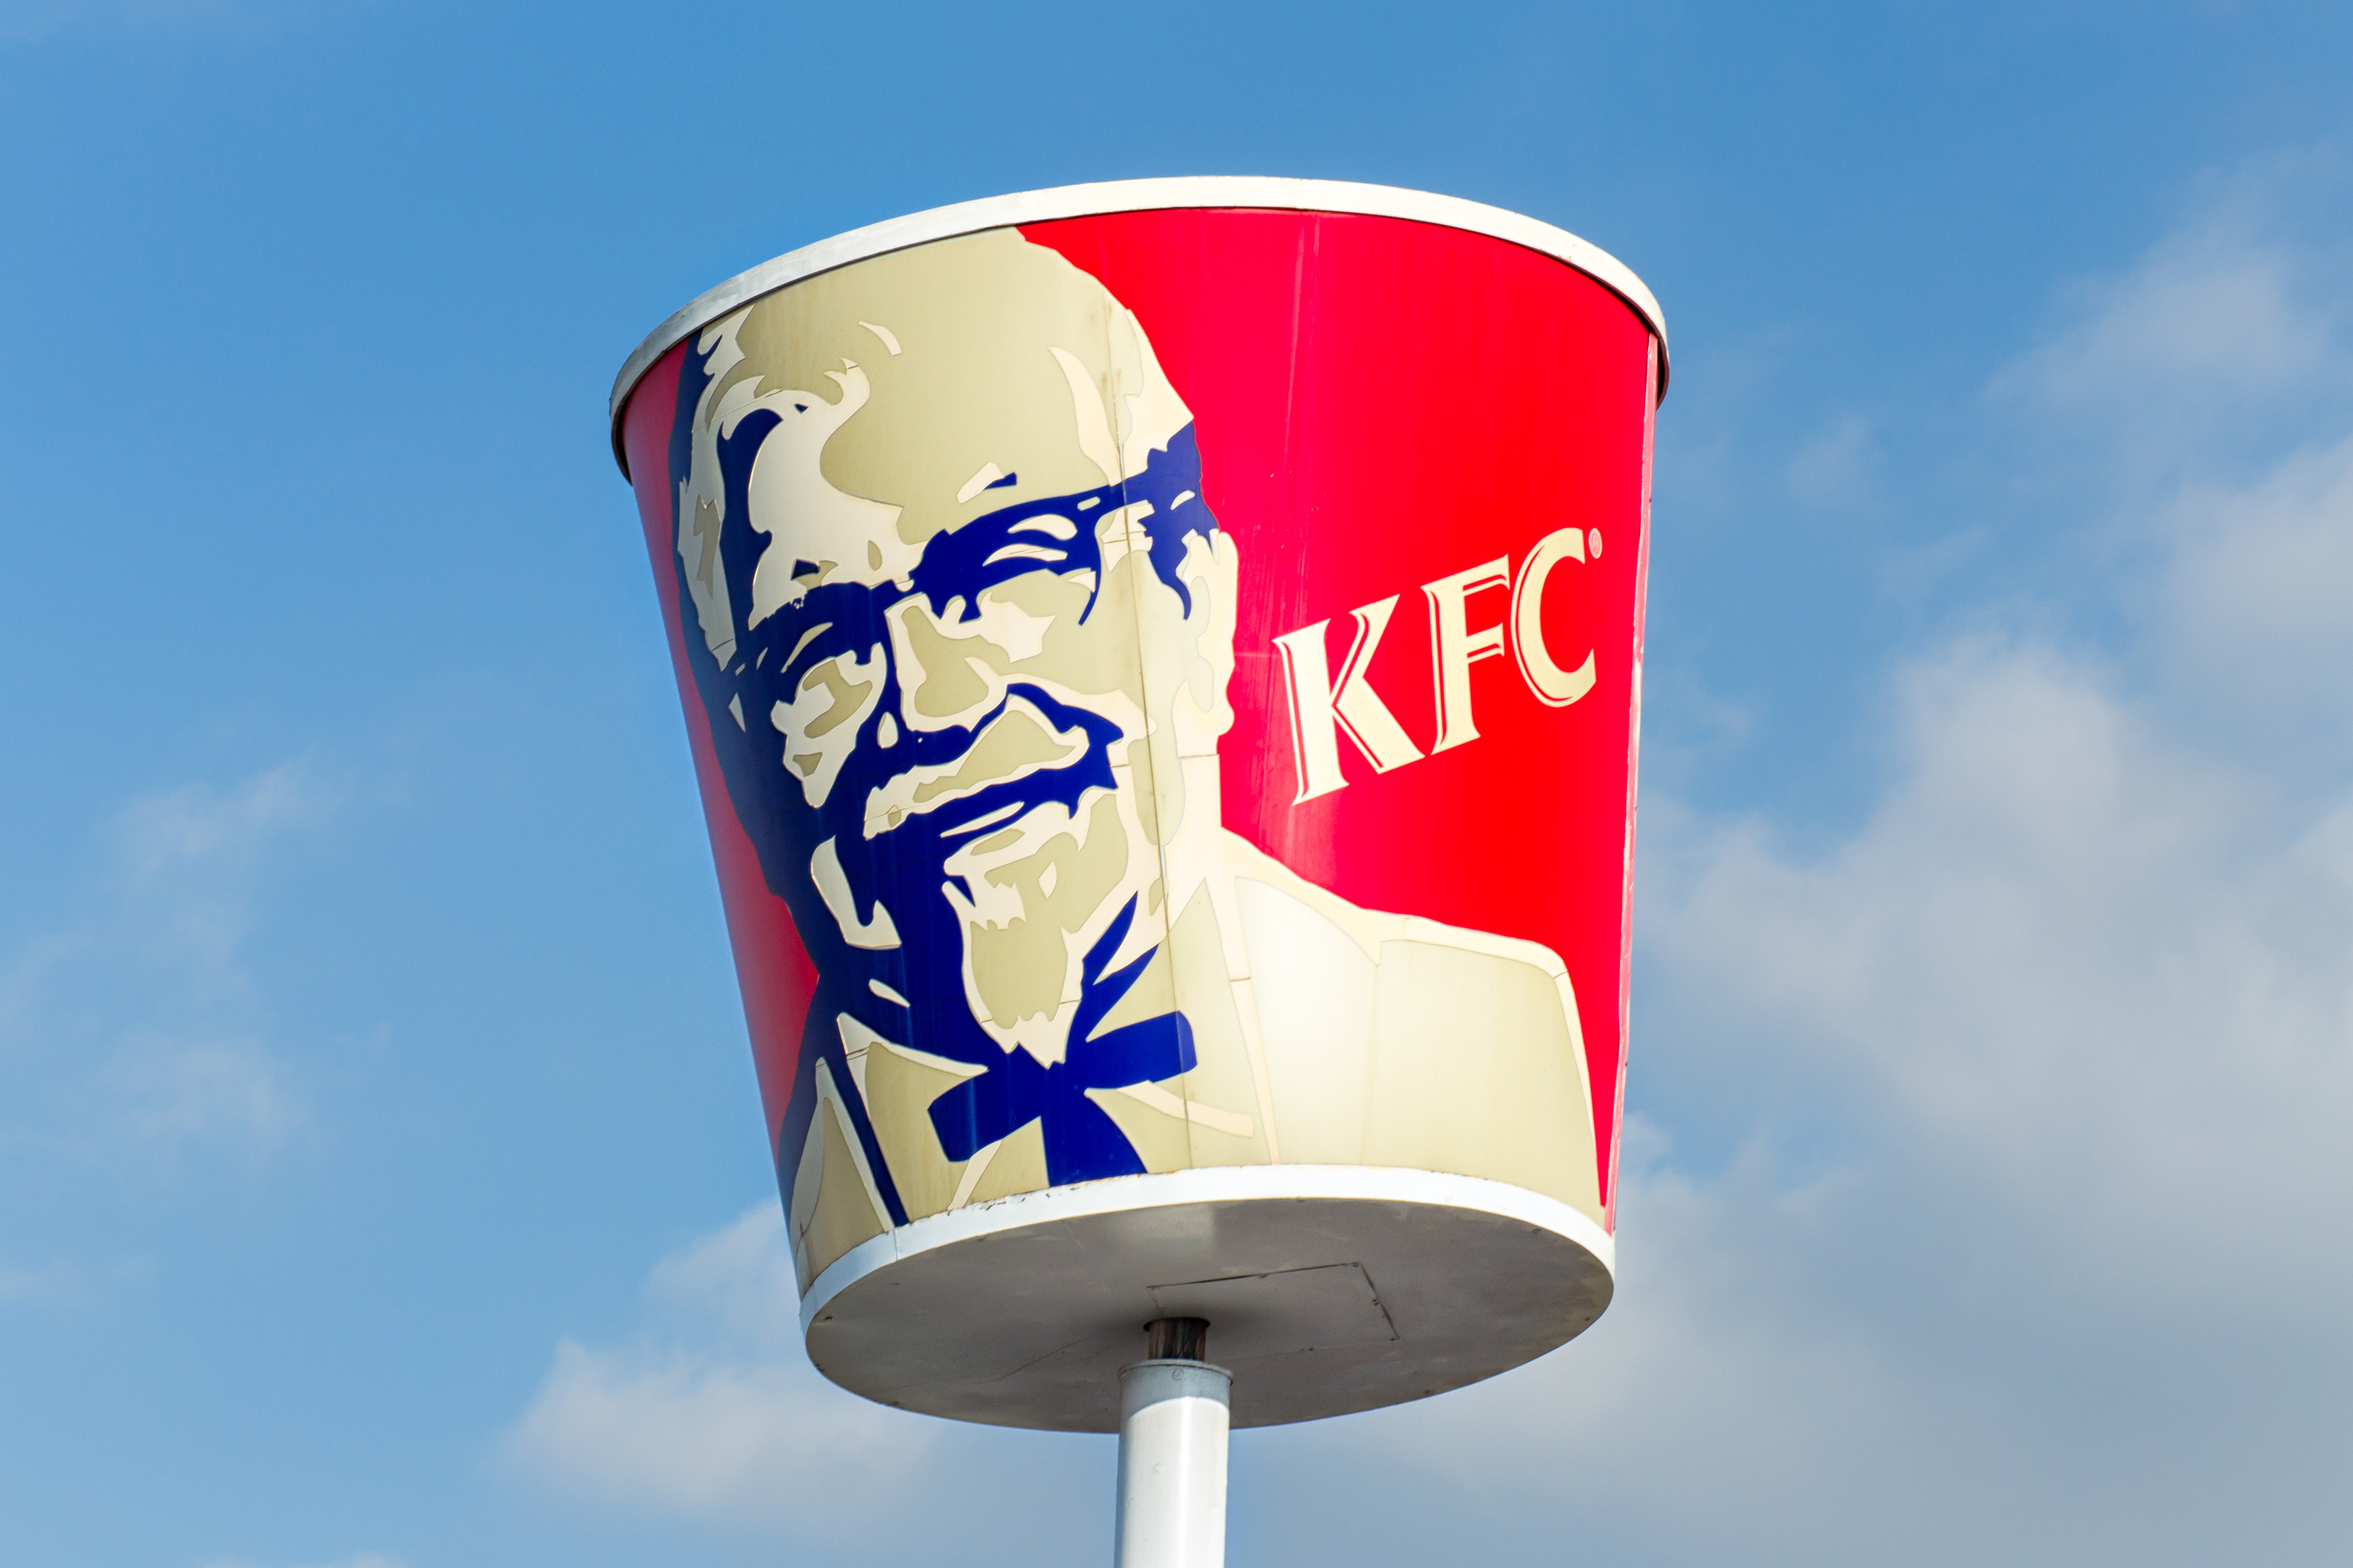 products, kfc, sign